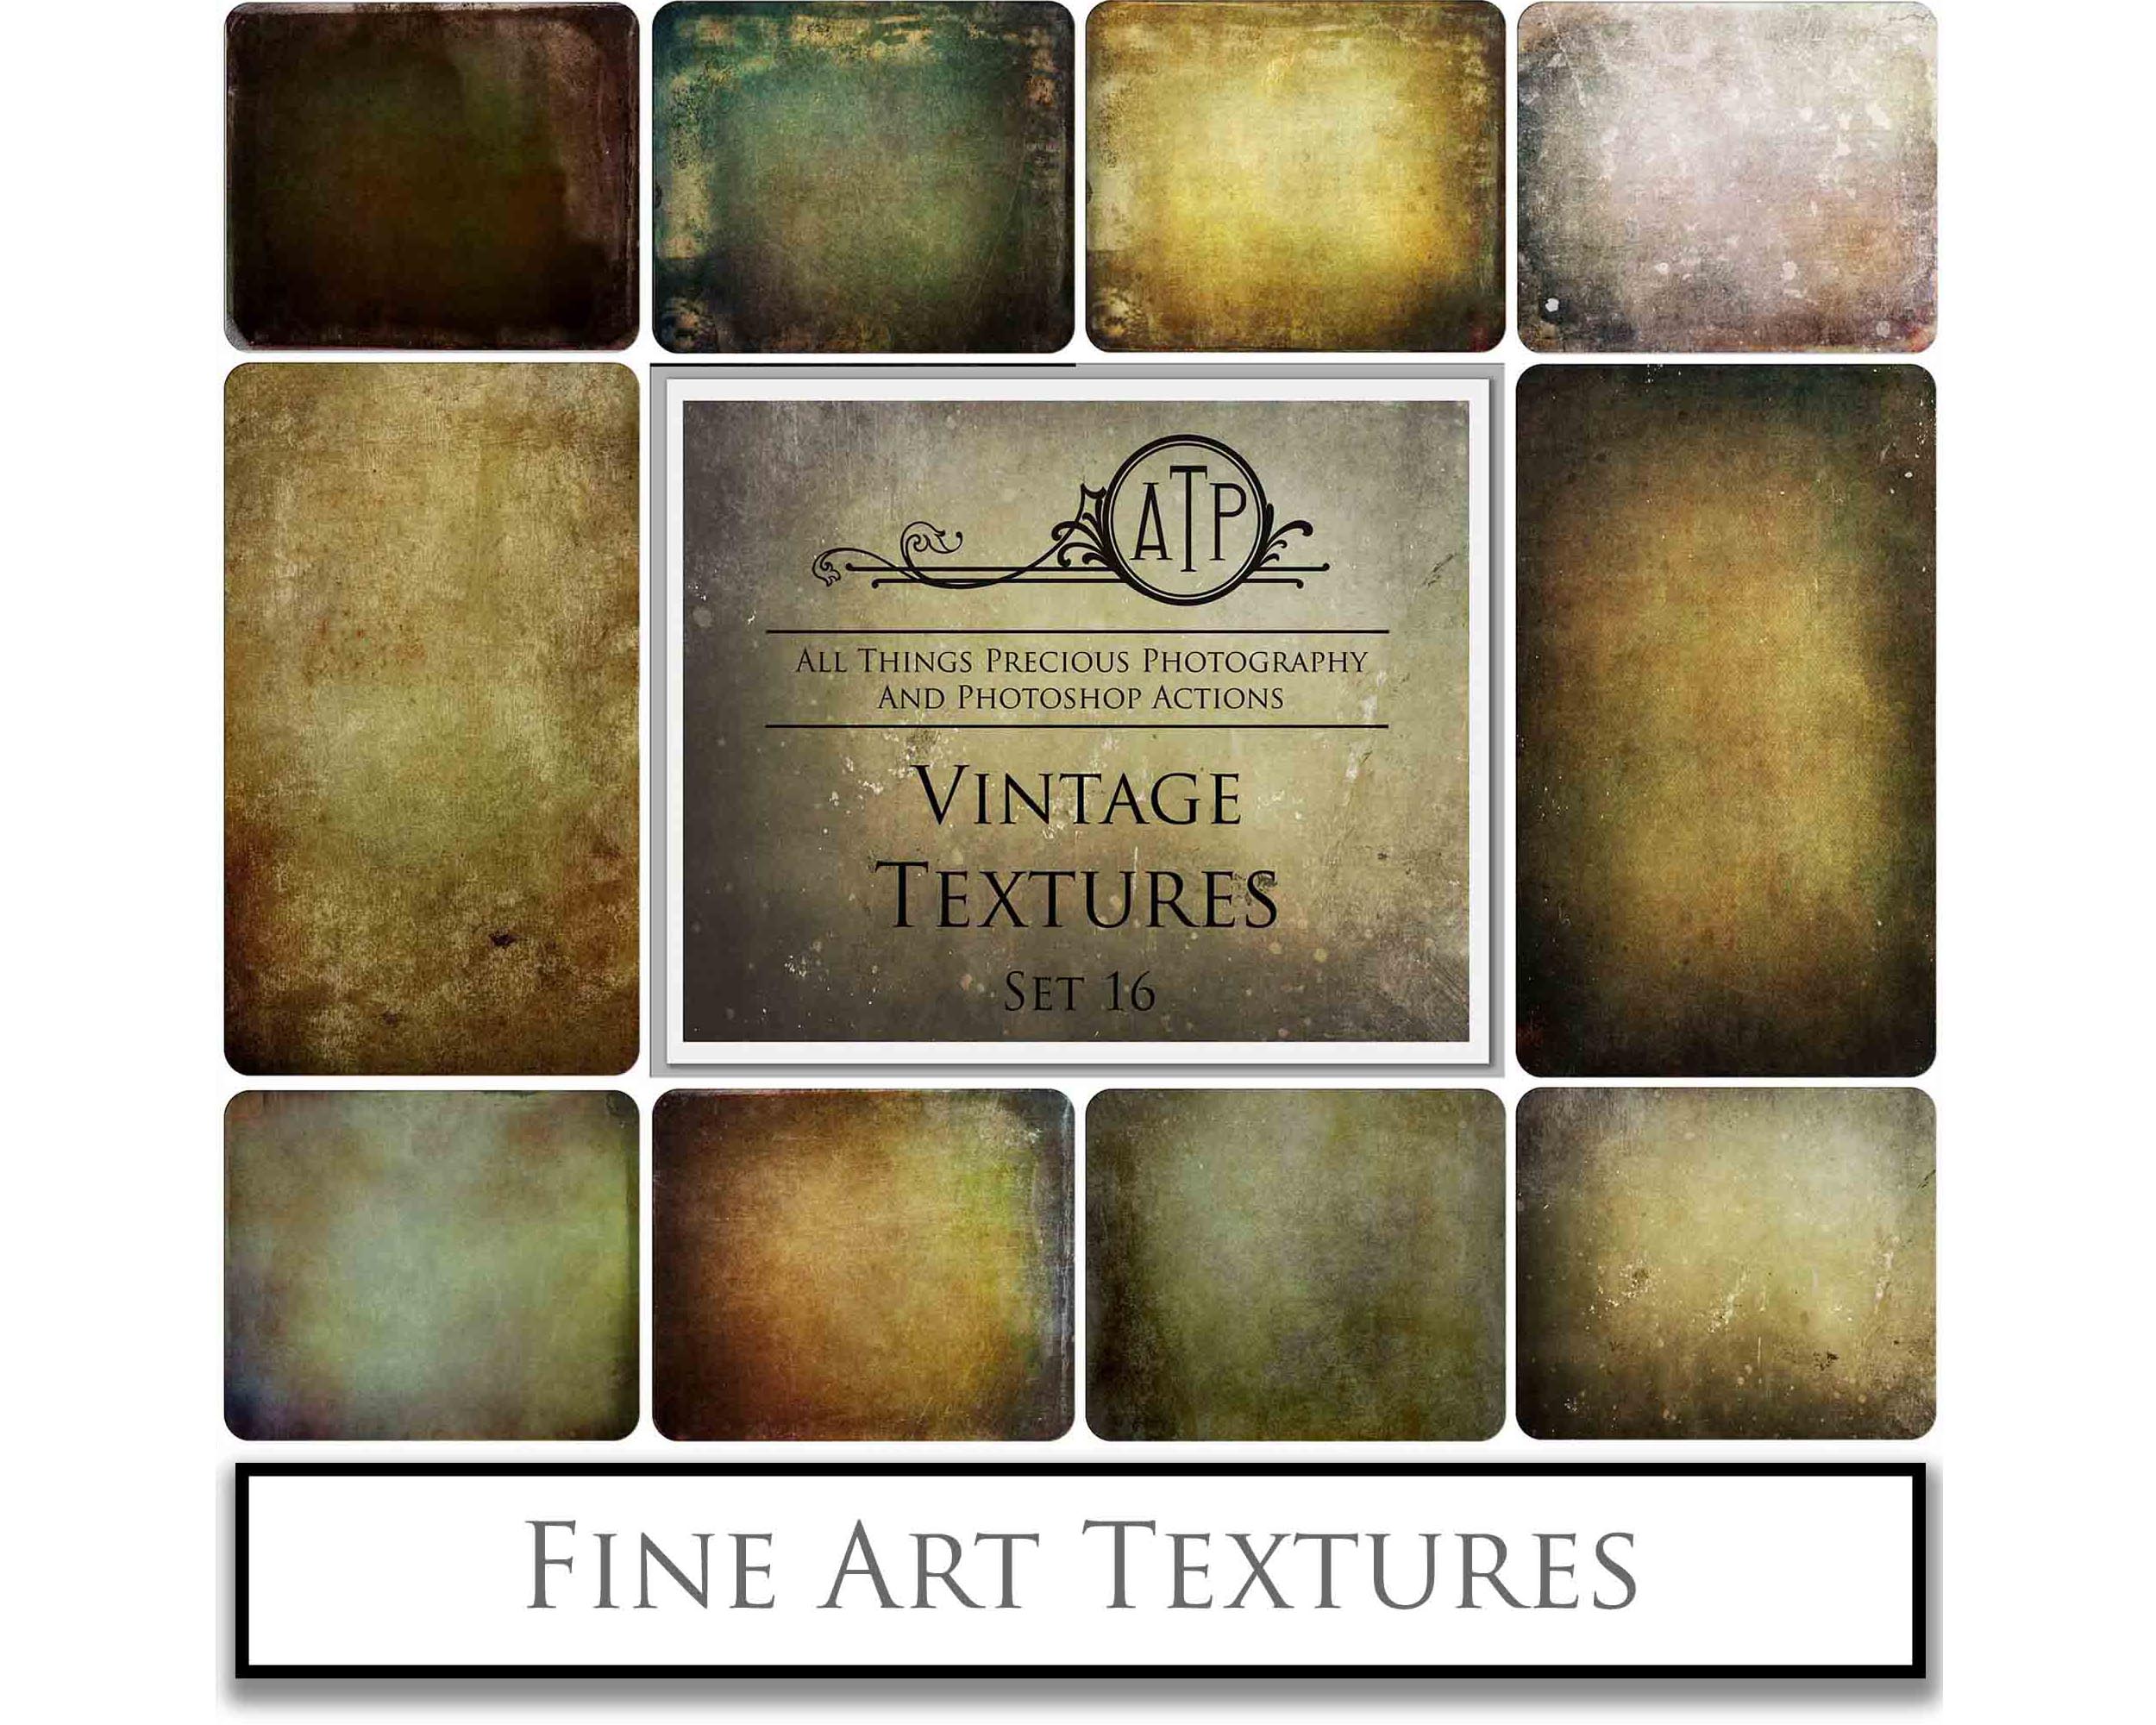 Vintage aged textures. Sweet Textures. Fine art texture for photographers, digital editing. Photo Overlays. Antique, Old World, Grunge, Light, Bundle. Textured printable Canvas, Colour, black and white, Bundle. High resolution, 300dpi Graphic Assets for photography, digital scrapbooking and design. By ATP Textures